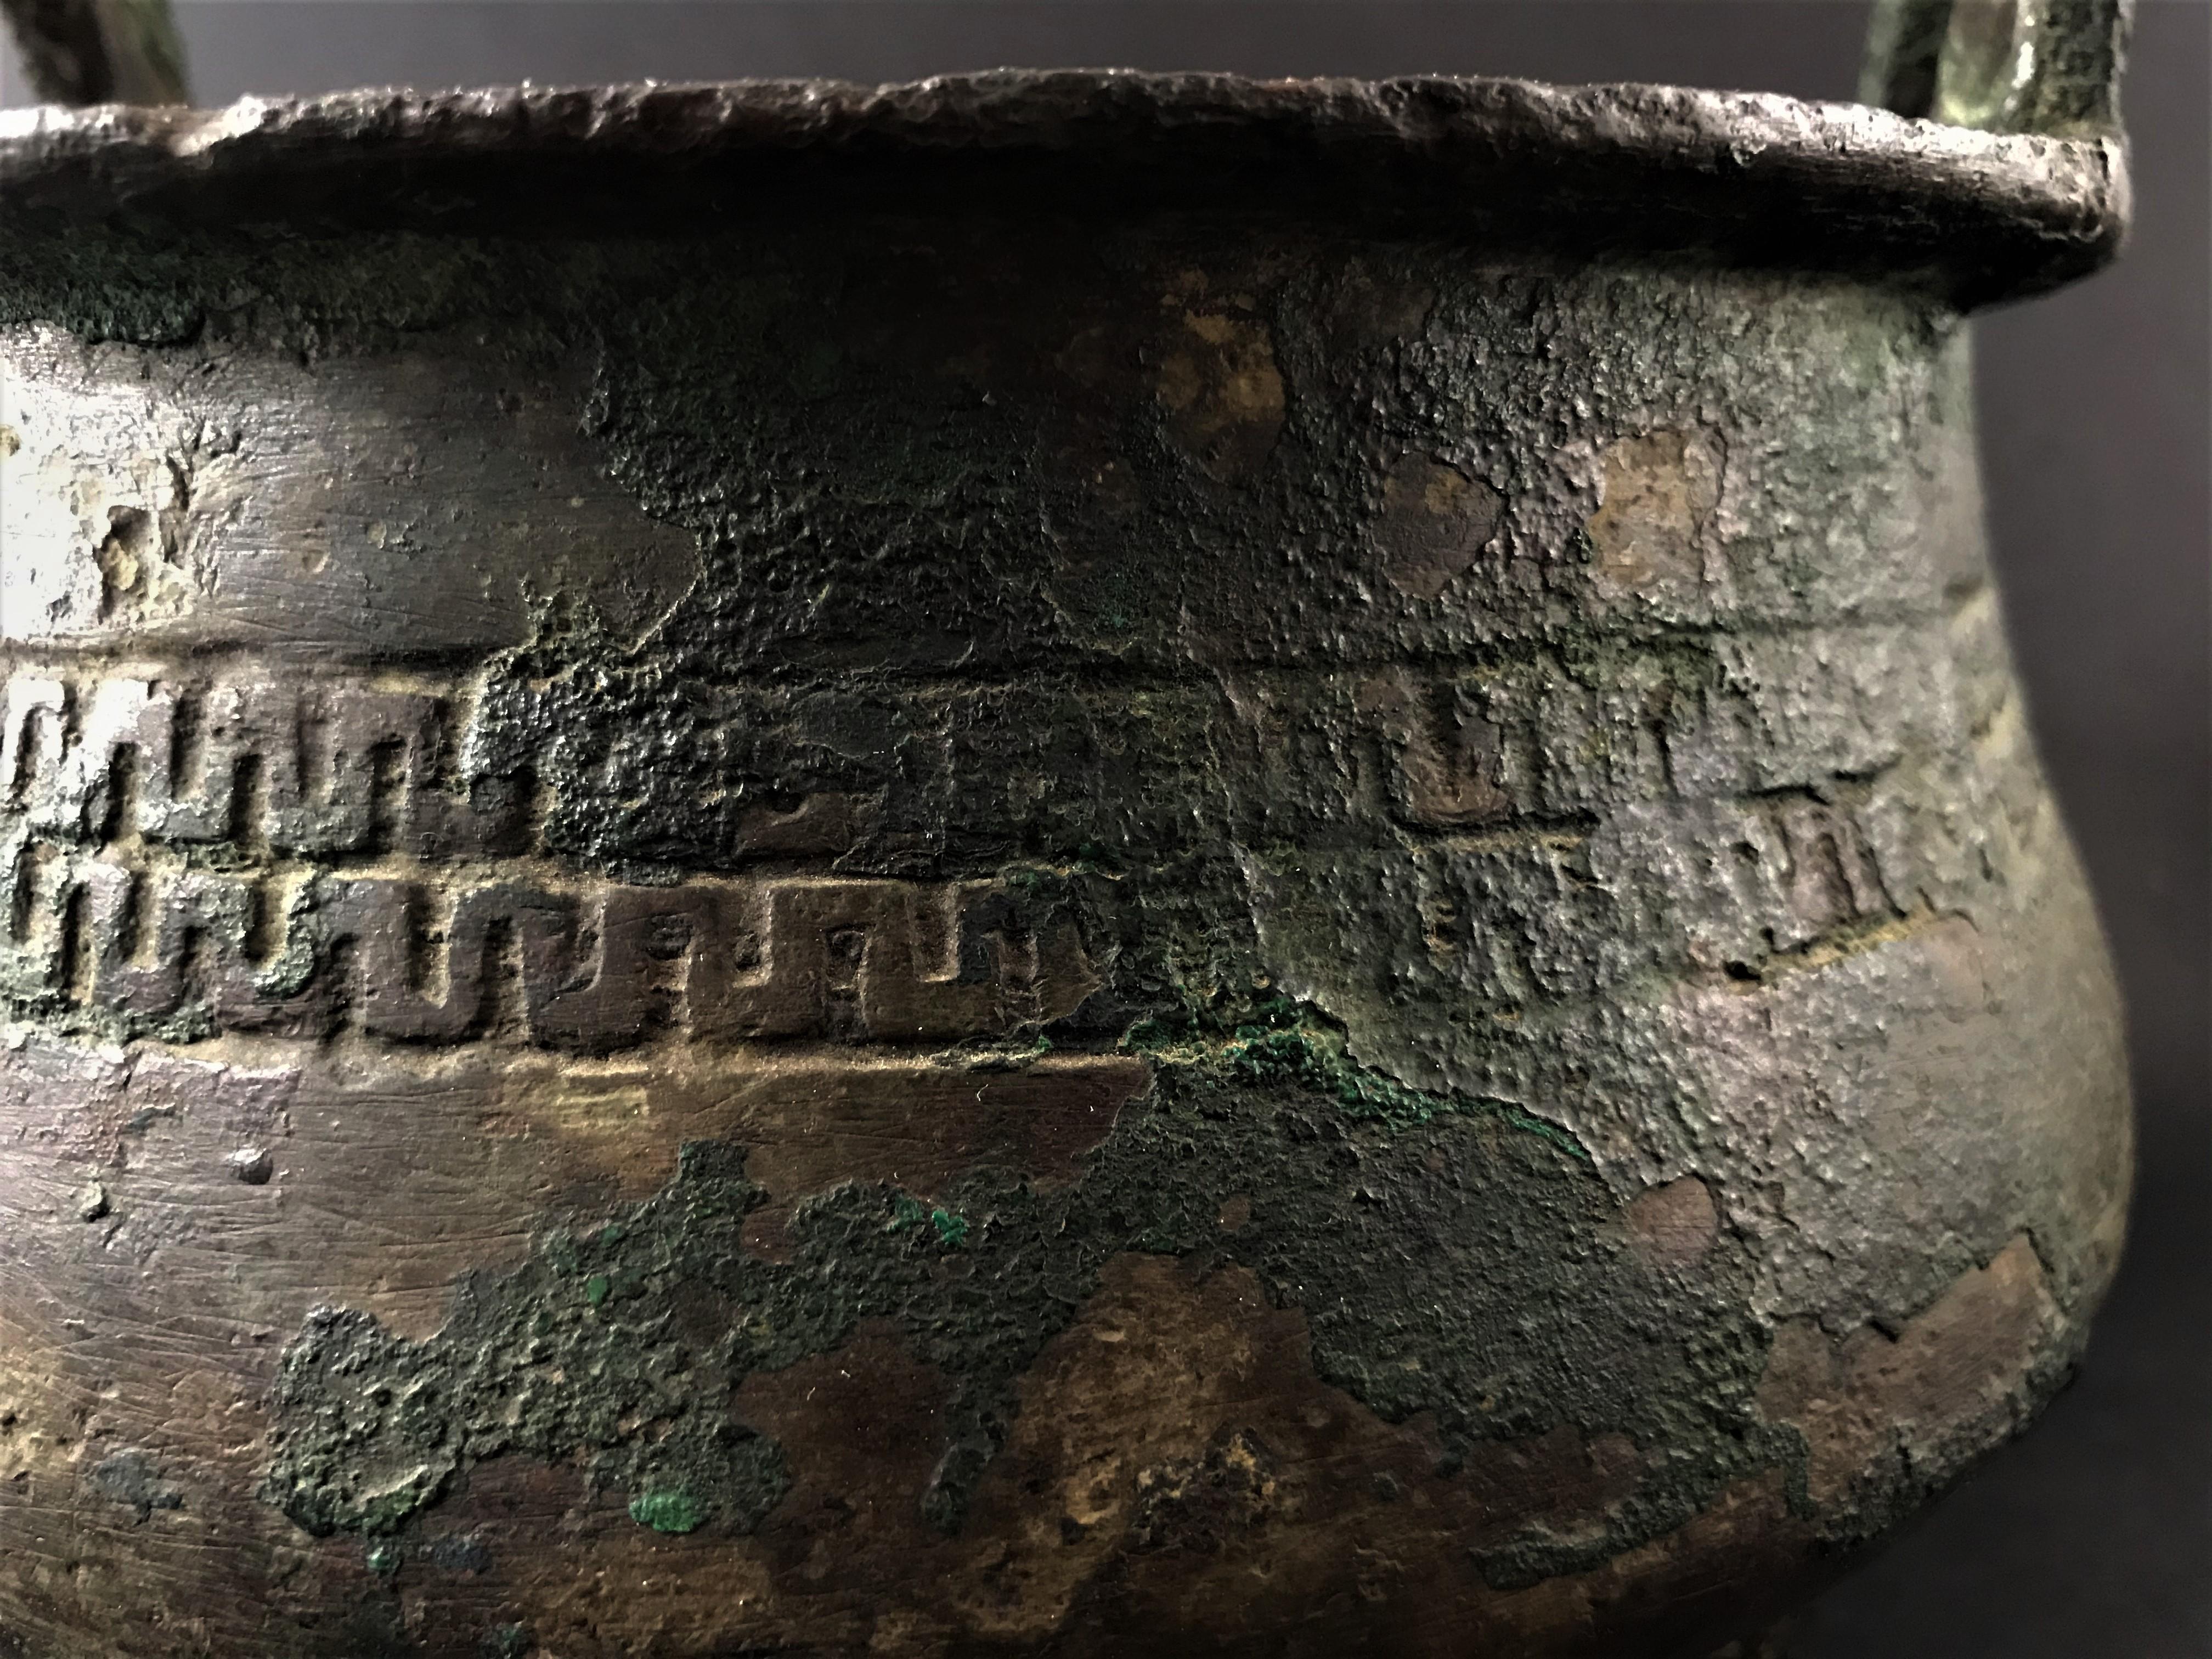 Bucket burns perfume in bronze resting on three feet. The body is sculpted with a band frieze with an archaic motif. Two inverted U-shaped handles punctuate the edge. This type of bronze bucket was cast with lost wax from molds in several parts and